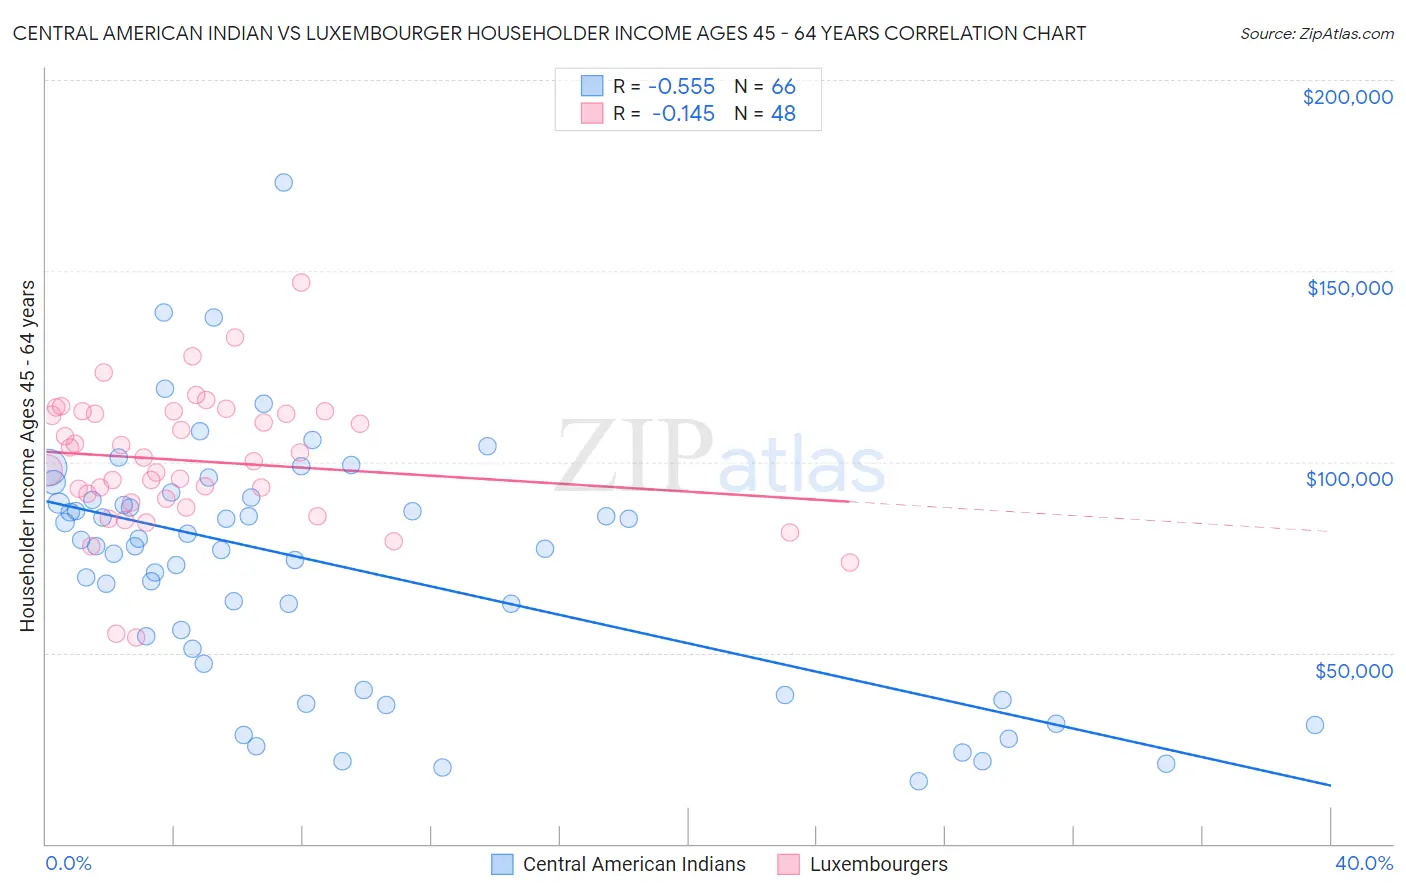 Central American Indian vs Luxembourger Householder Income Ages 45 - 64 years